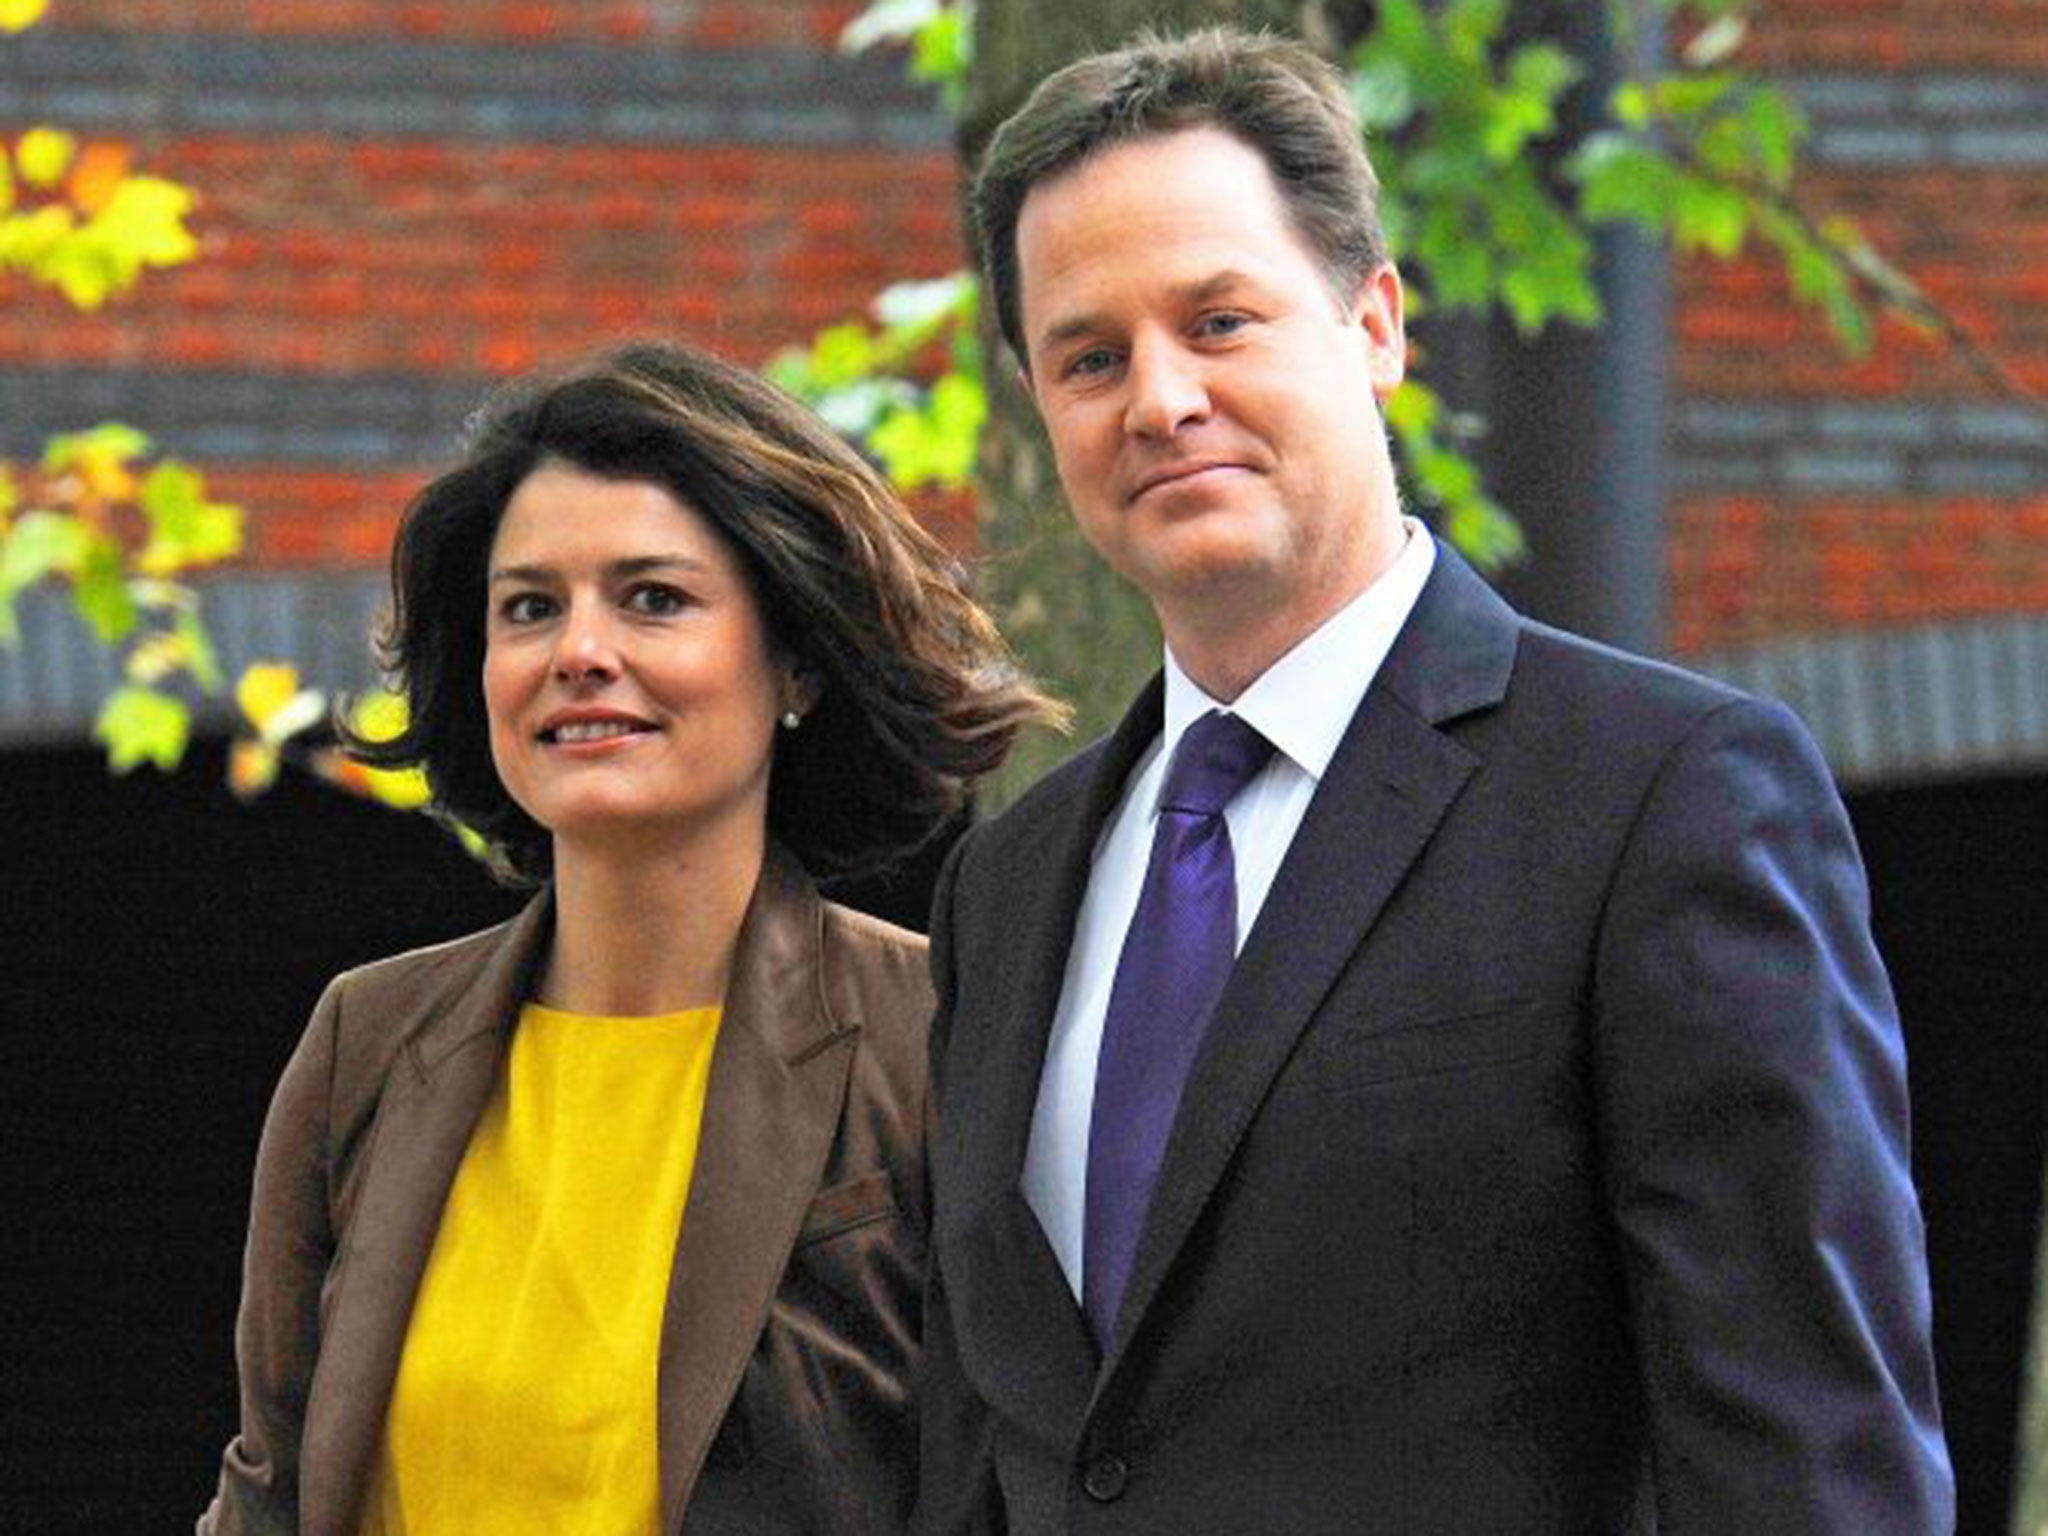 Nick Clegg and his Spanish wife, Miriam Gonzalez Durantez, who uses her maiden name